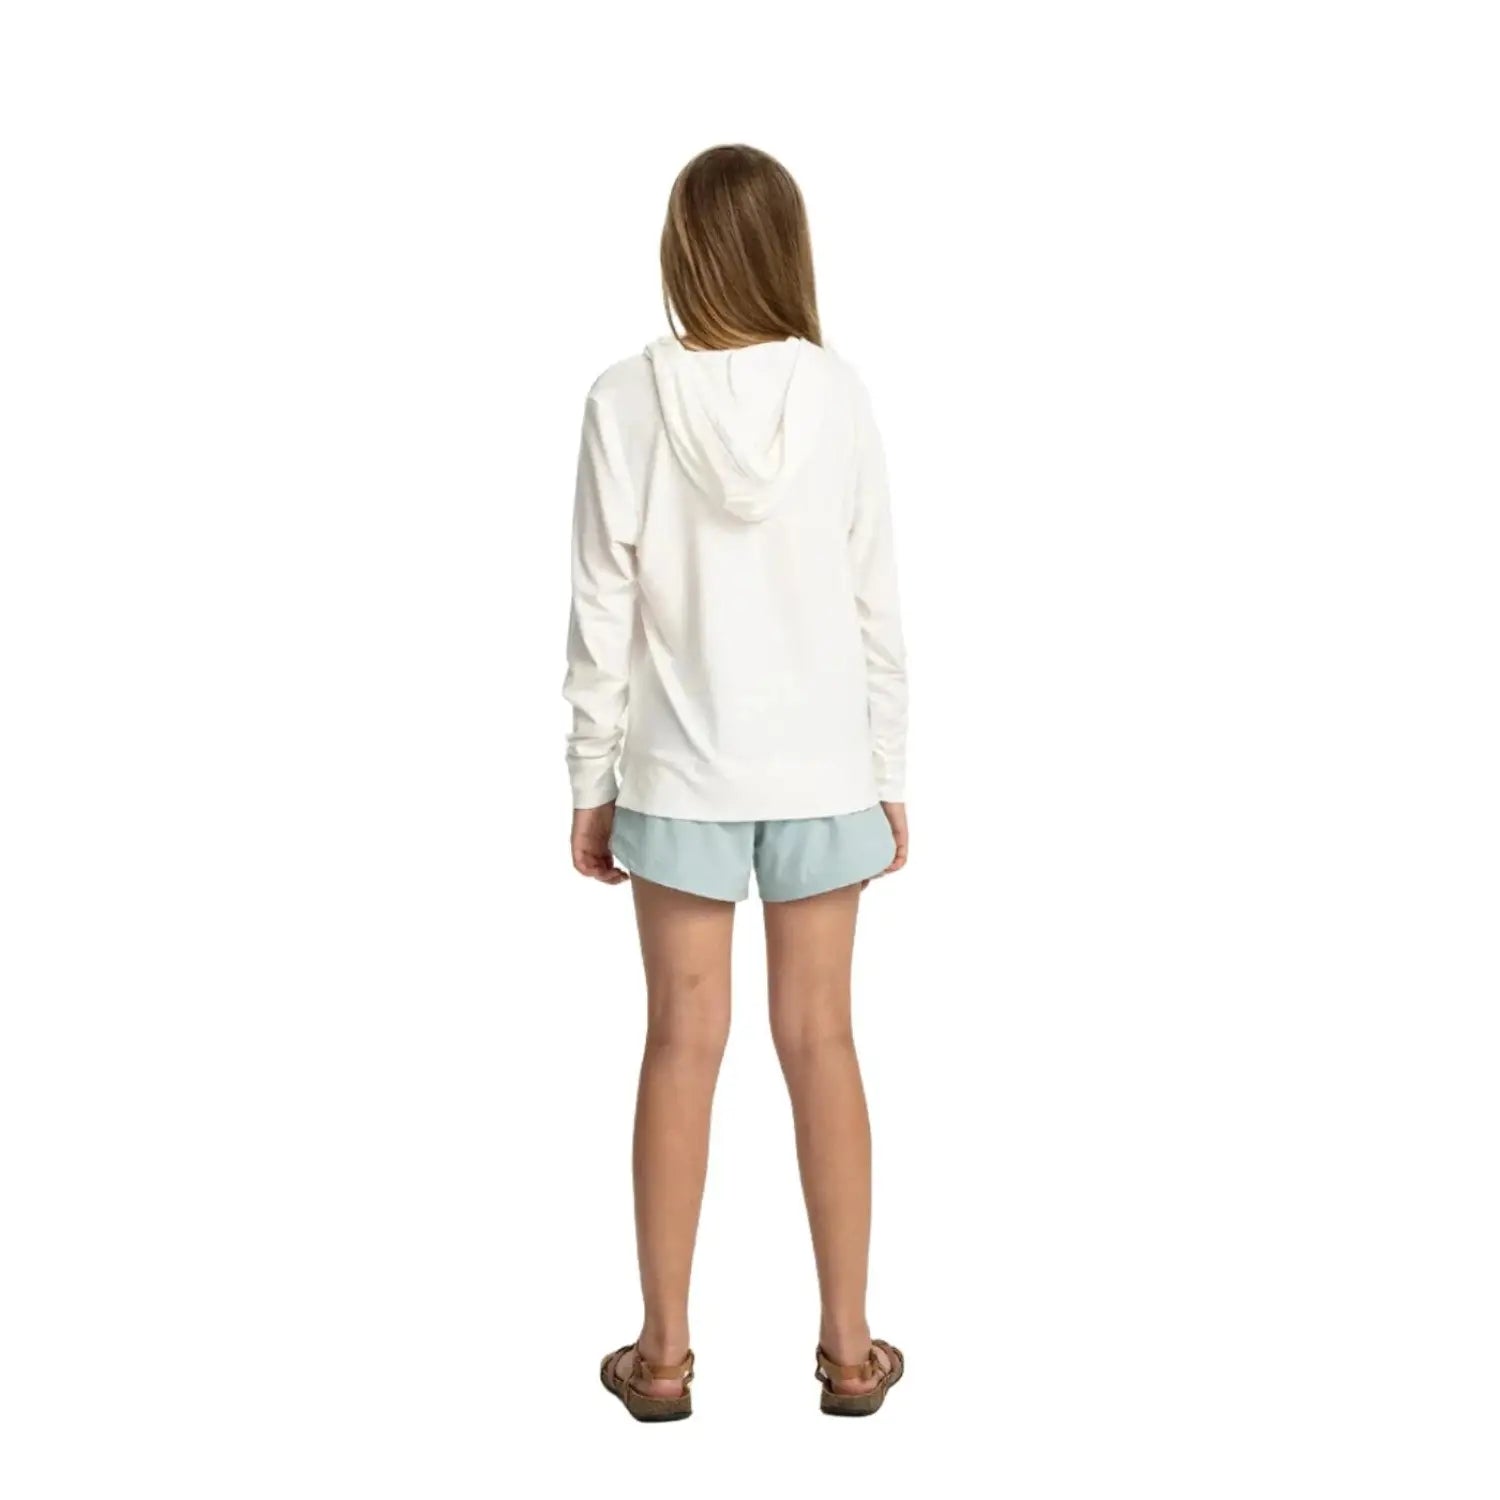 Free Fly K's Pull-On Breeze Short, Sea Glass, back view on model 